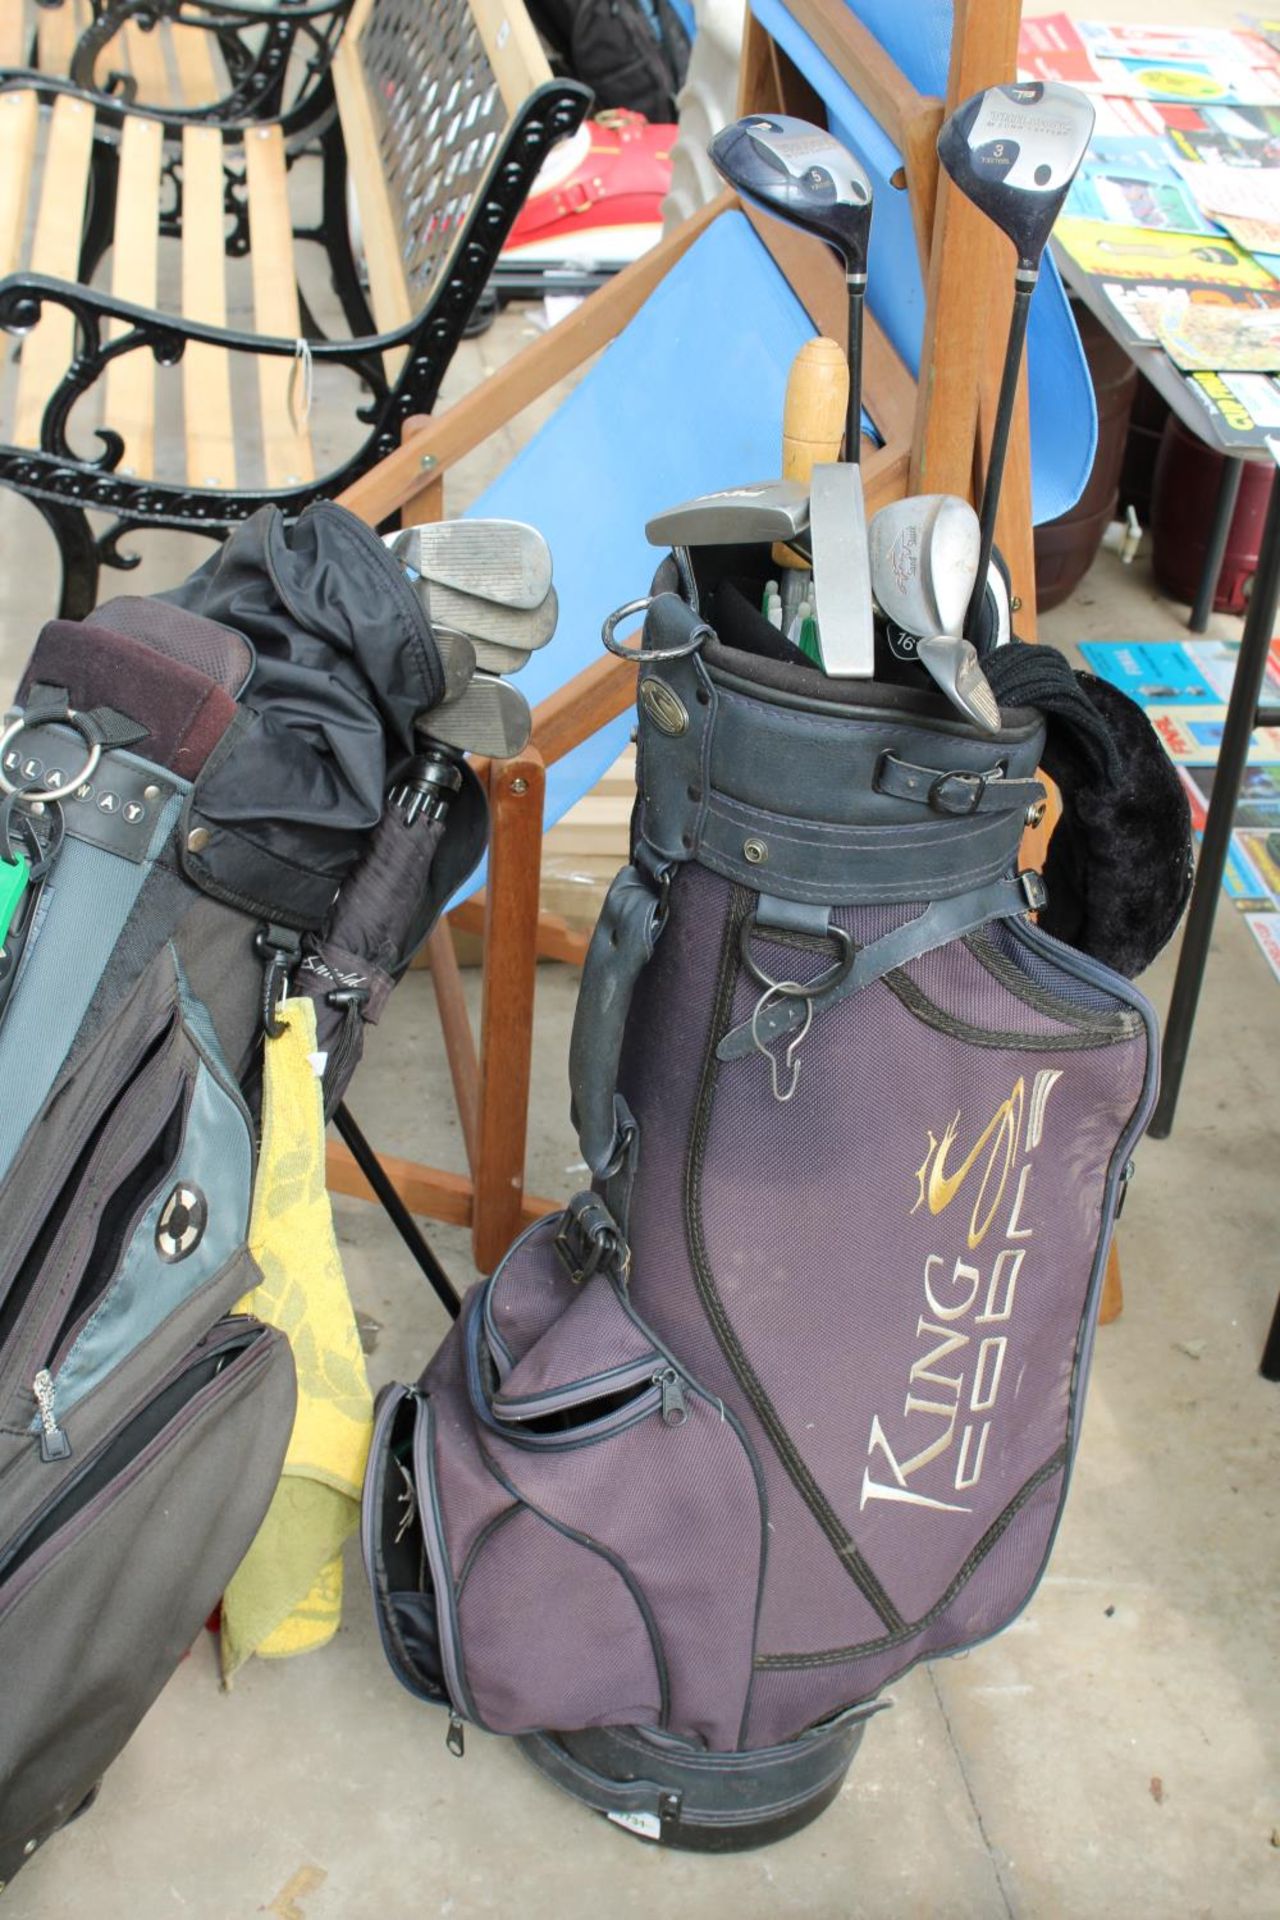 TWO GOLF BAGS AND AN ASSORTMENT OF GOLF CLUBS - Image 2 of 6